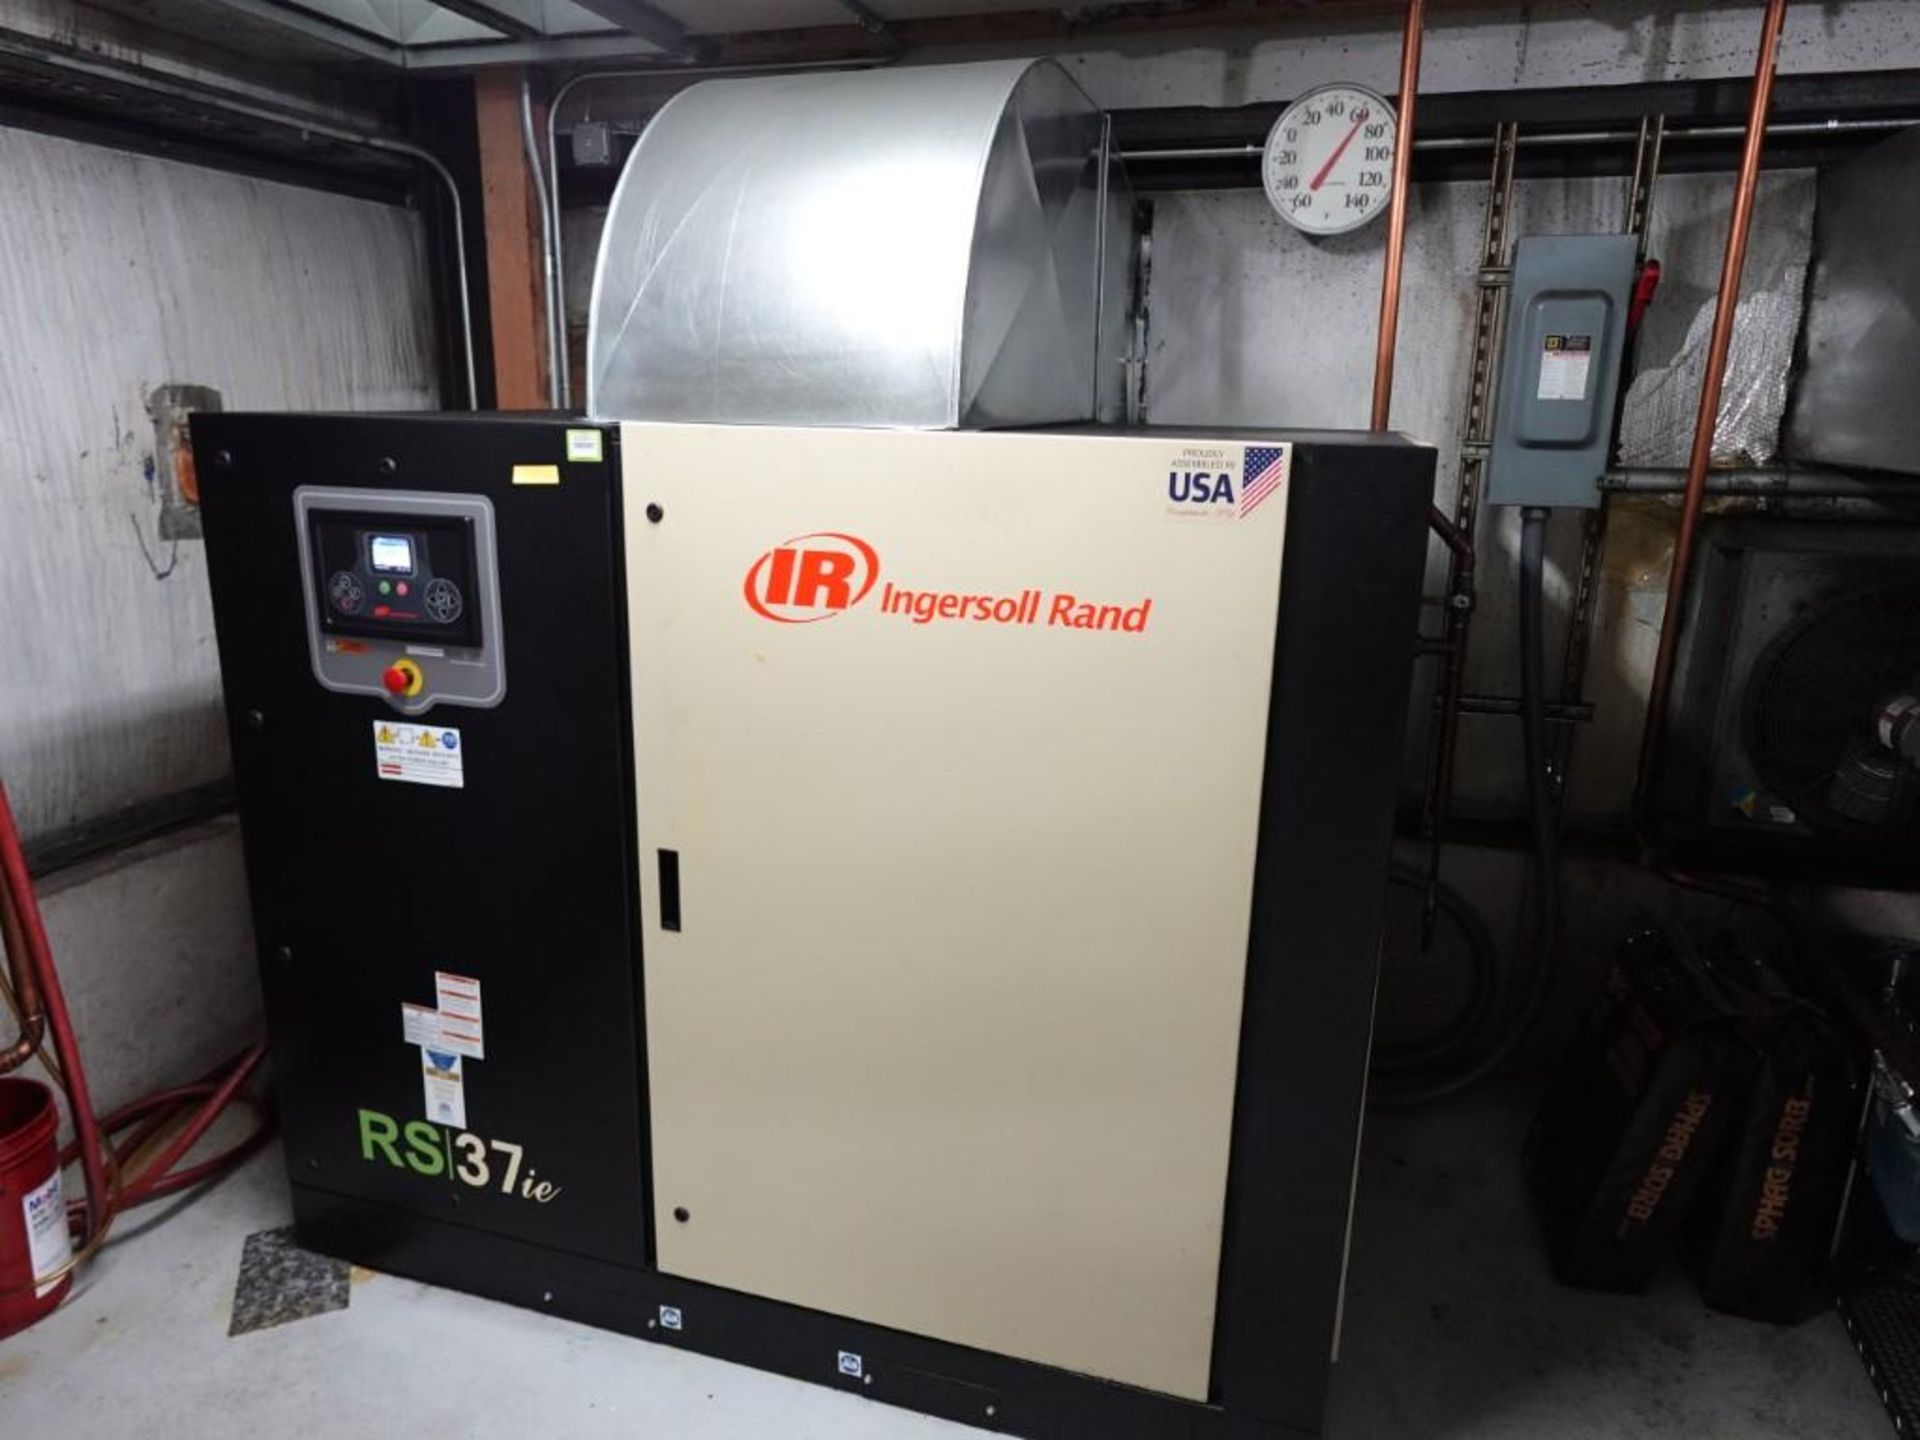 Ingersoll Rand RS37ie Air Compressor